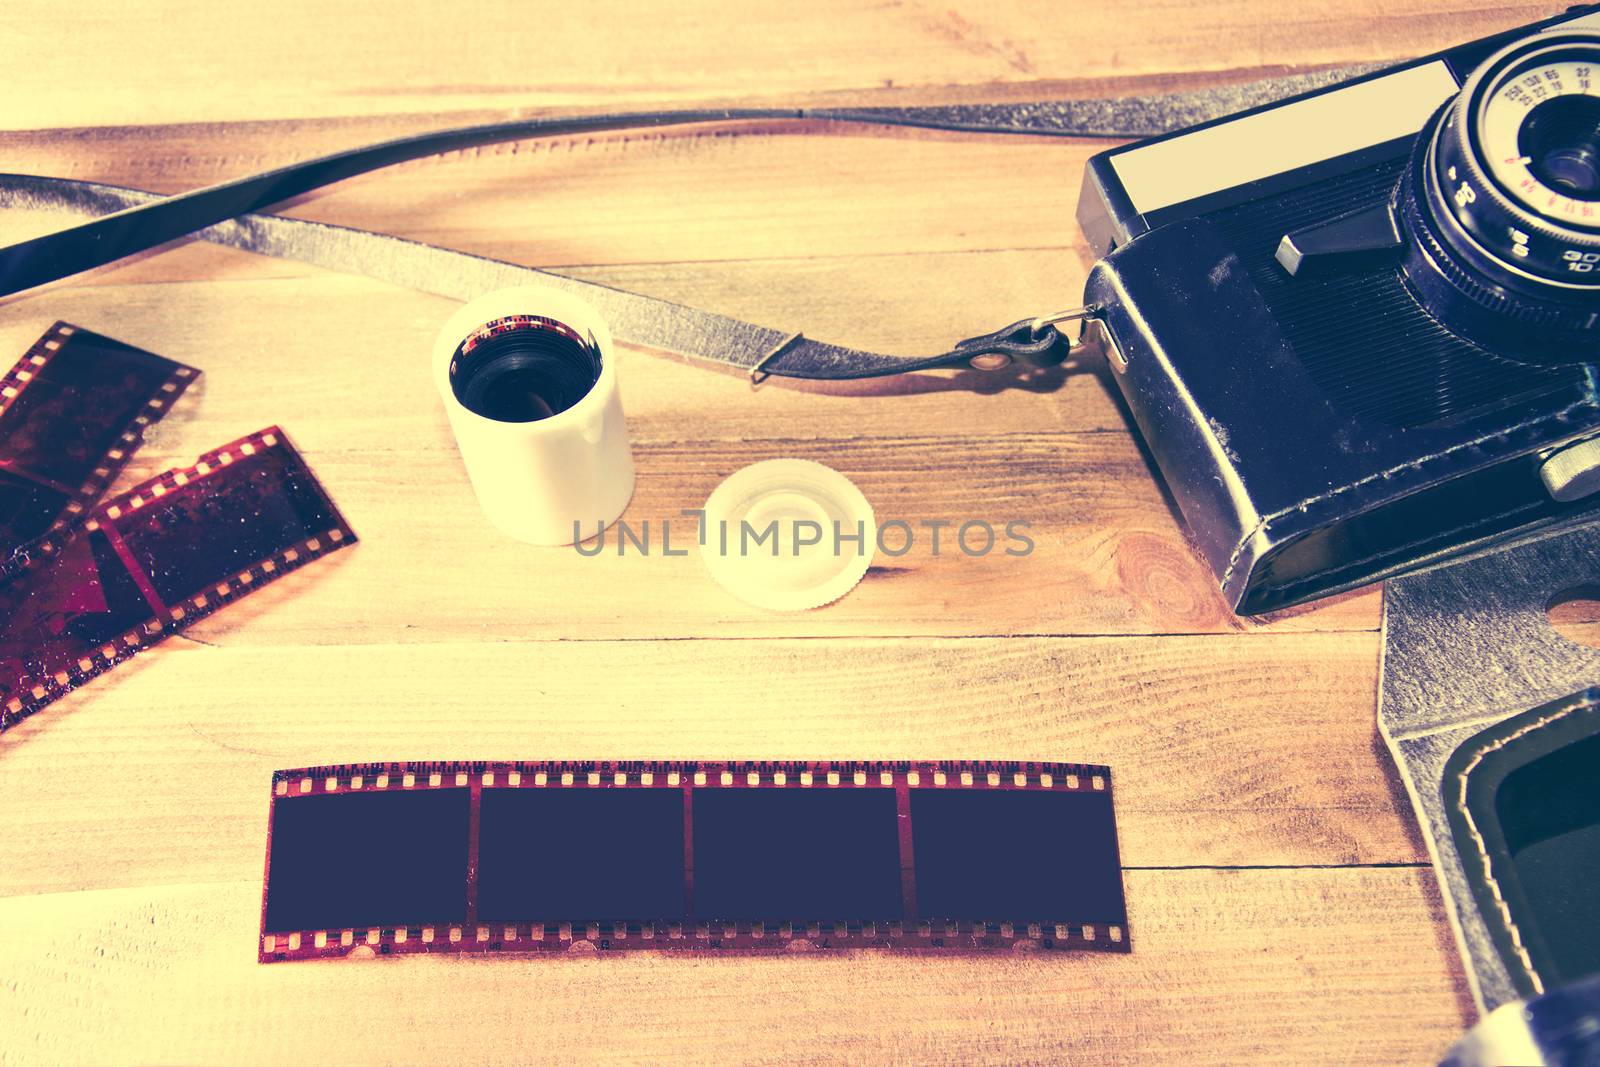 Retro vintage camera and photographic film on wooden background. Instagram retro vintage picture.